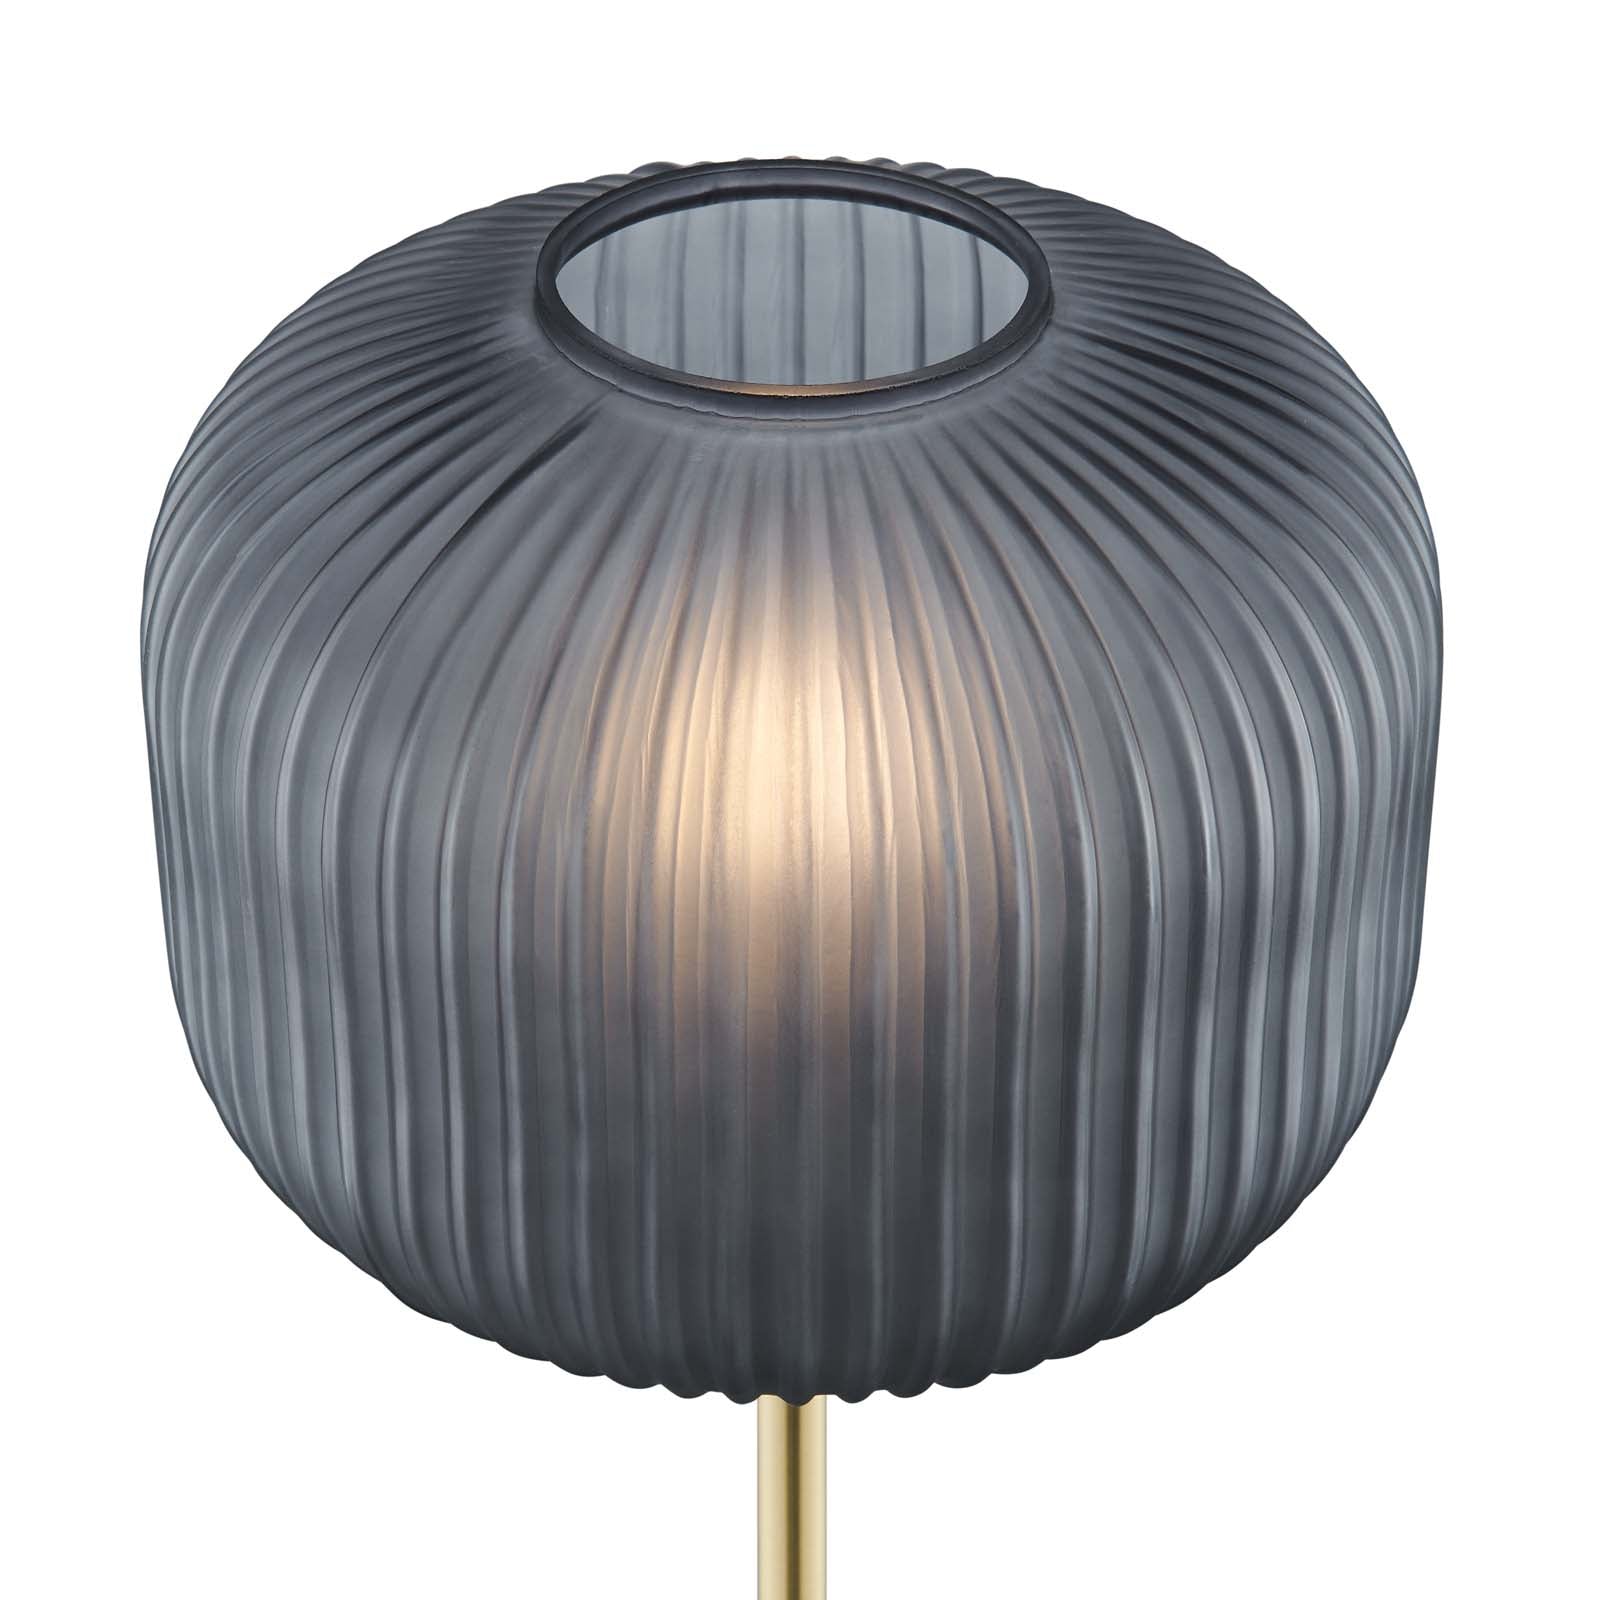 Reprise Glass Sphere Glass and Metal Floor Lamp-Floor Lamp-Modway-Wall2Wall Furnishings